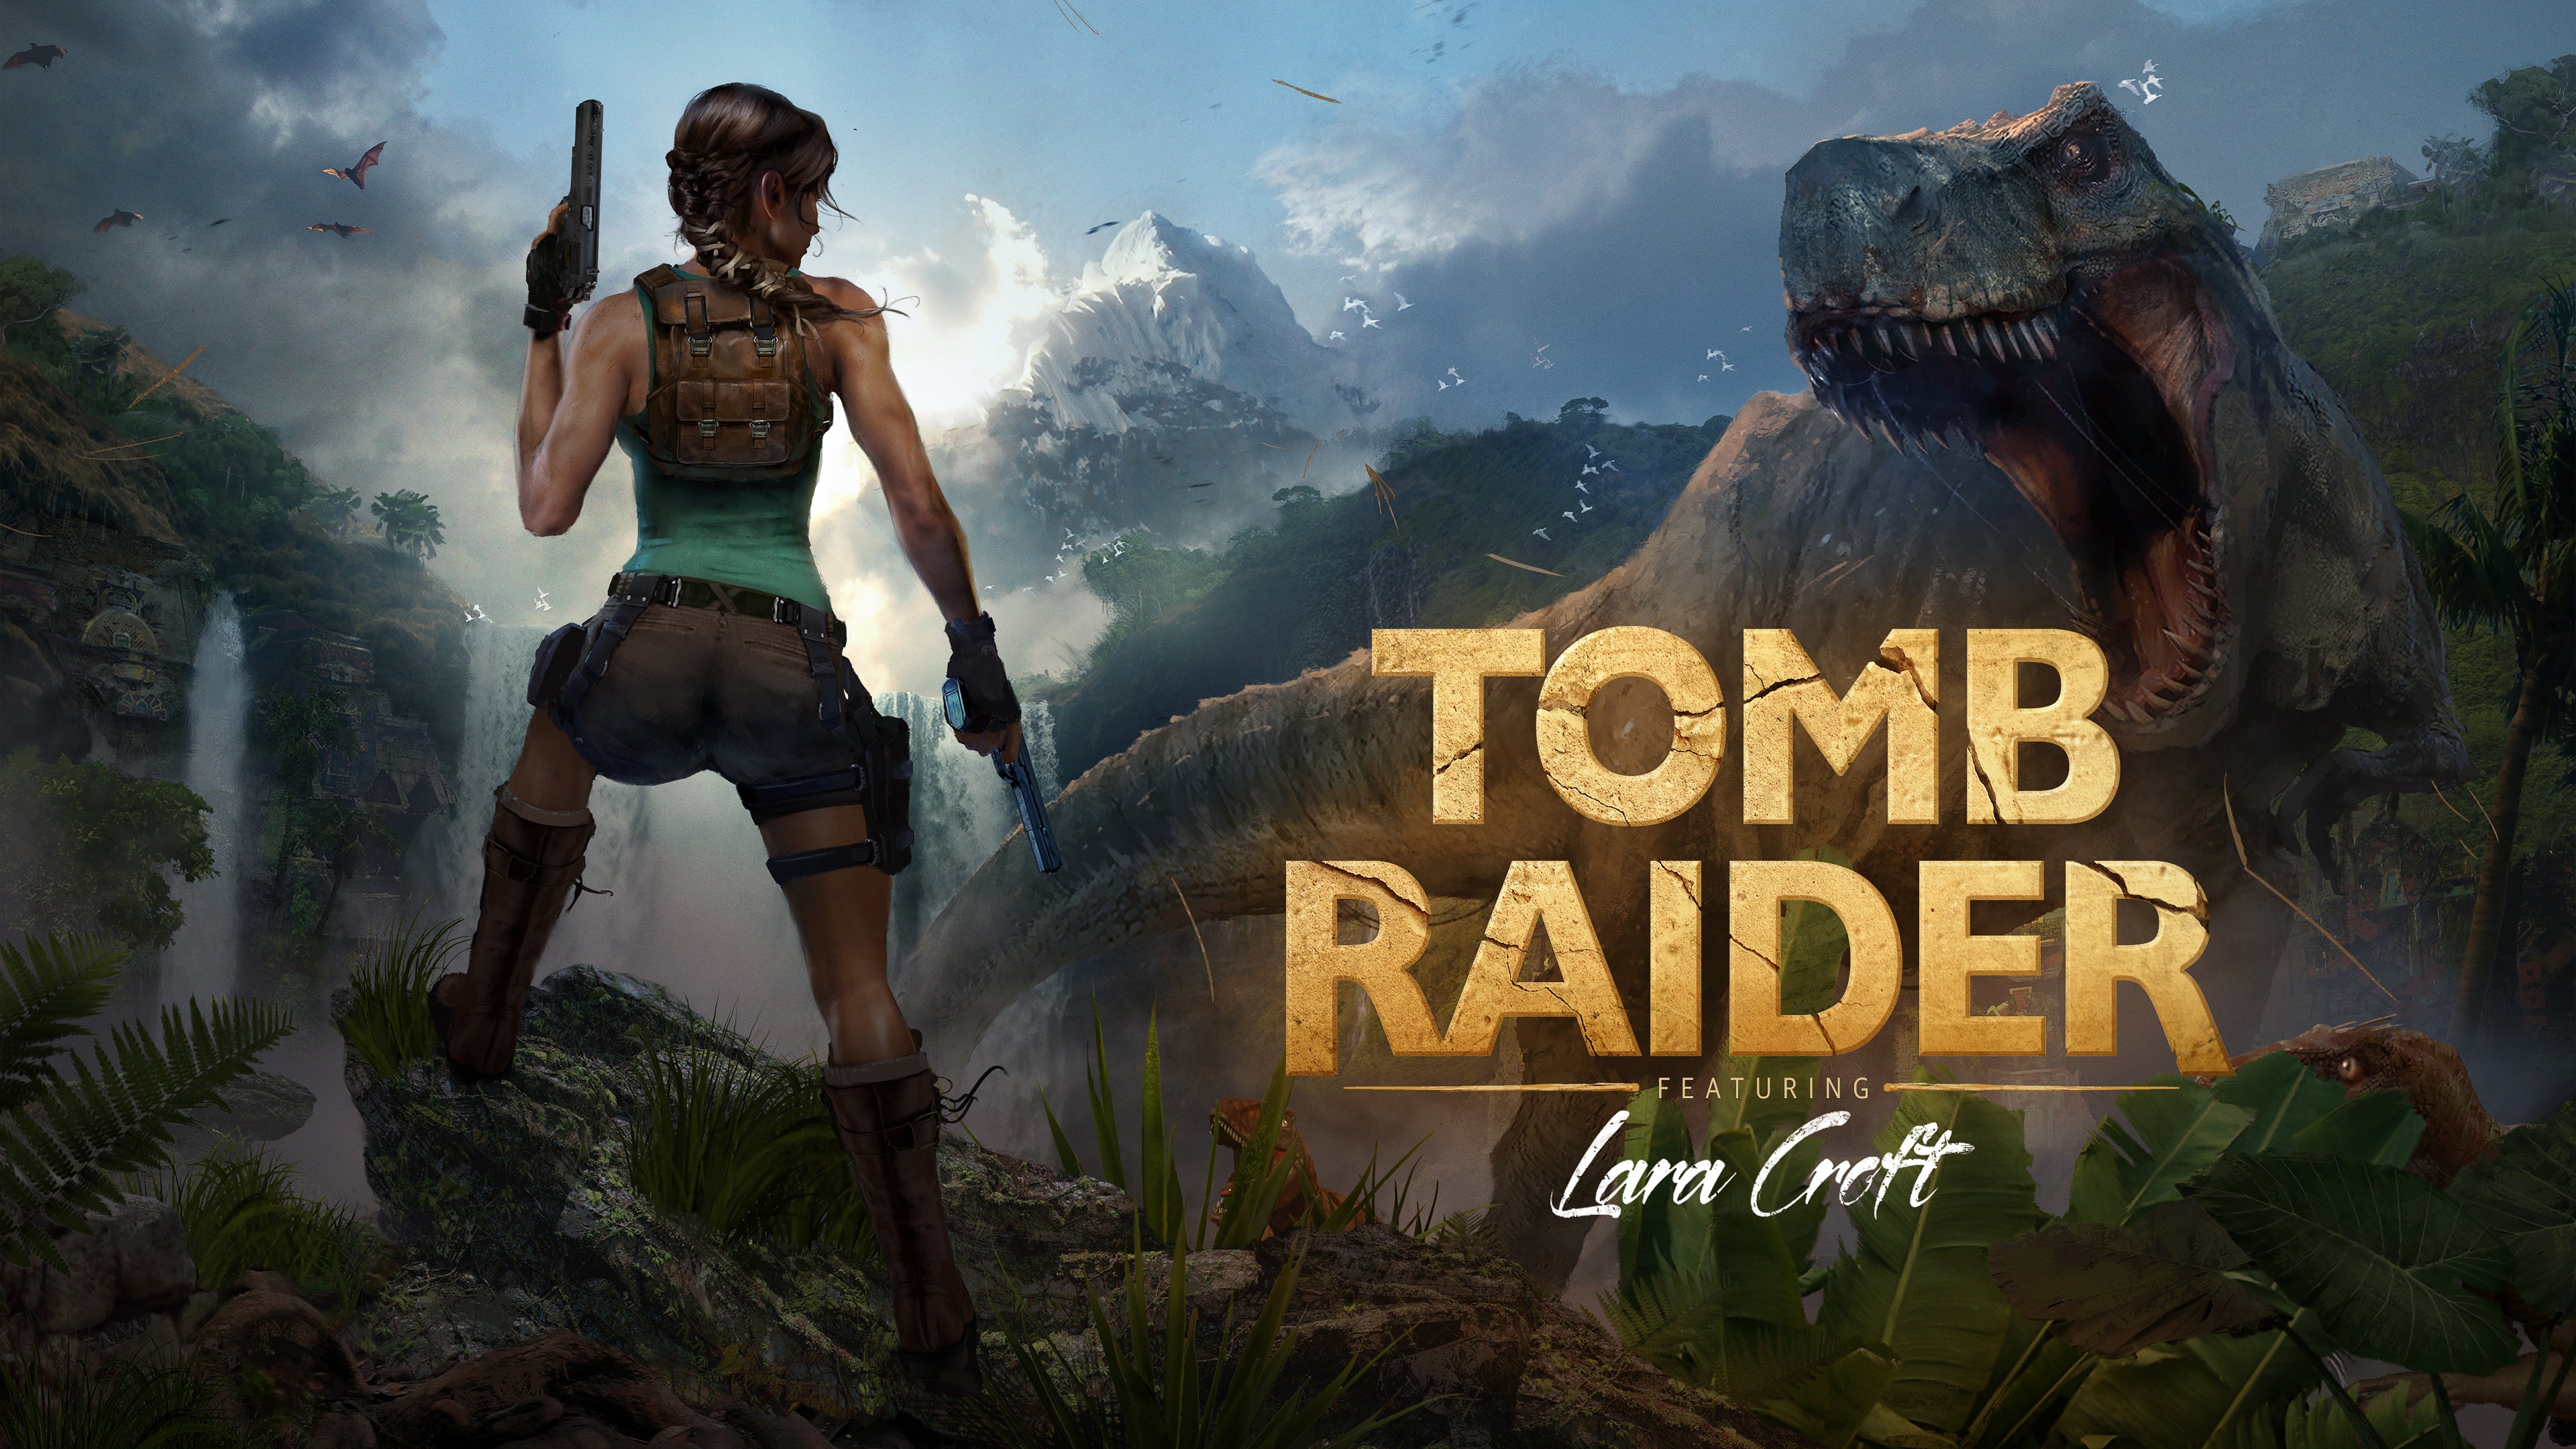 Square launches Tomb Raider 25th anniversary website and teases